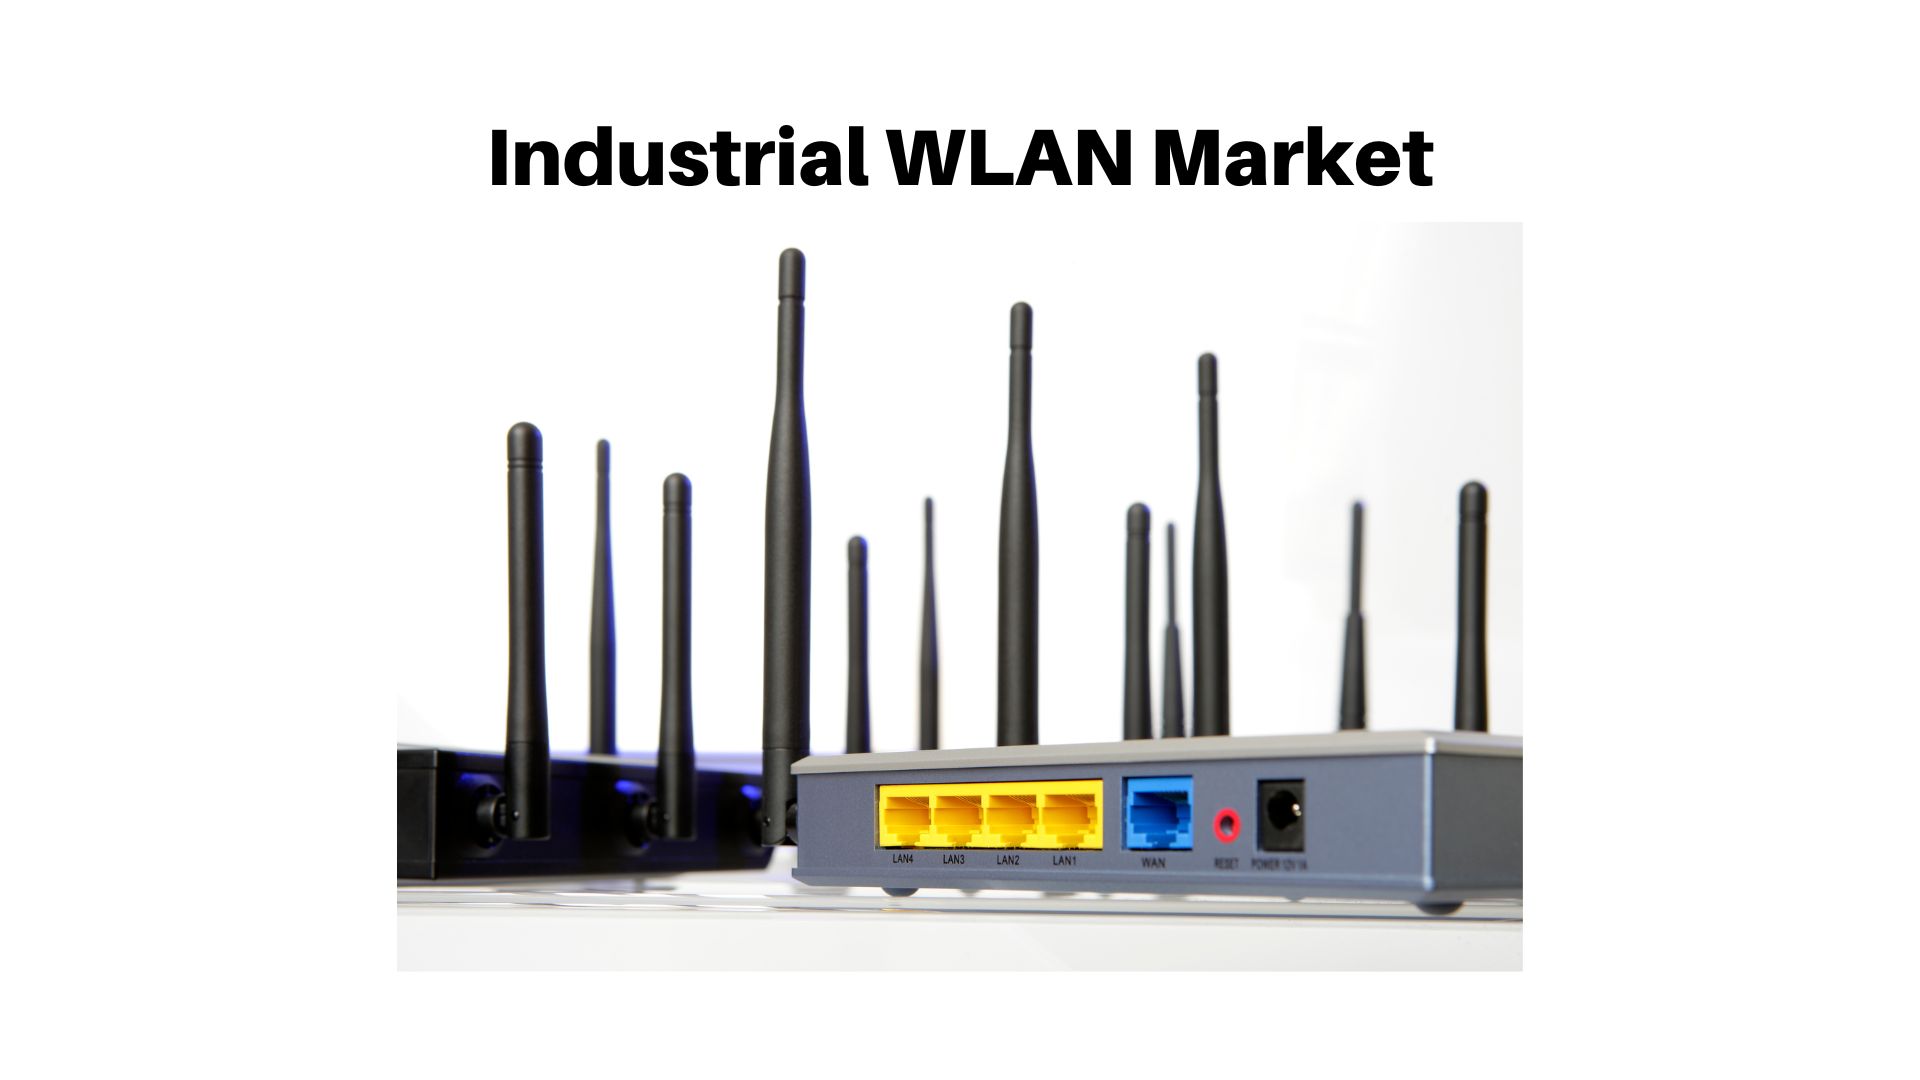 Industrial WLAN Market projected to reach a value of USD 8.44 Billion by 2032